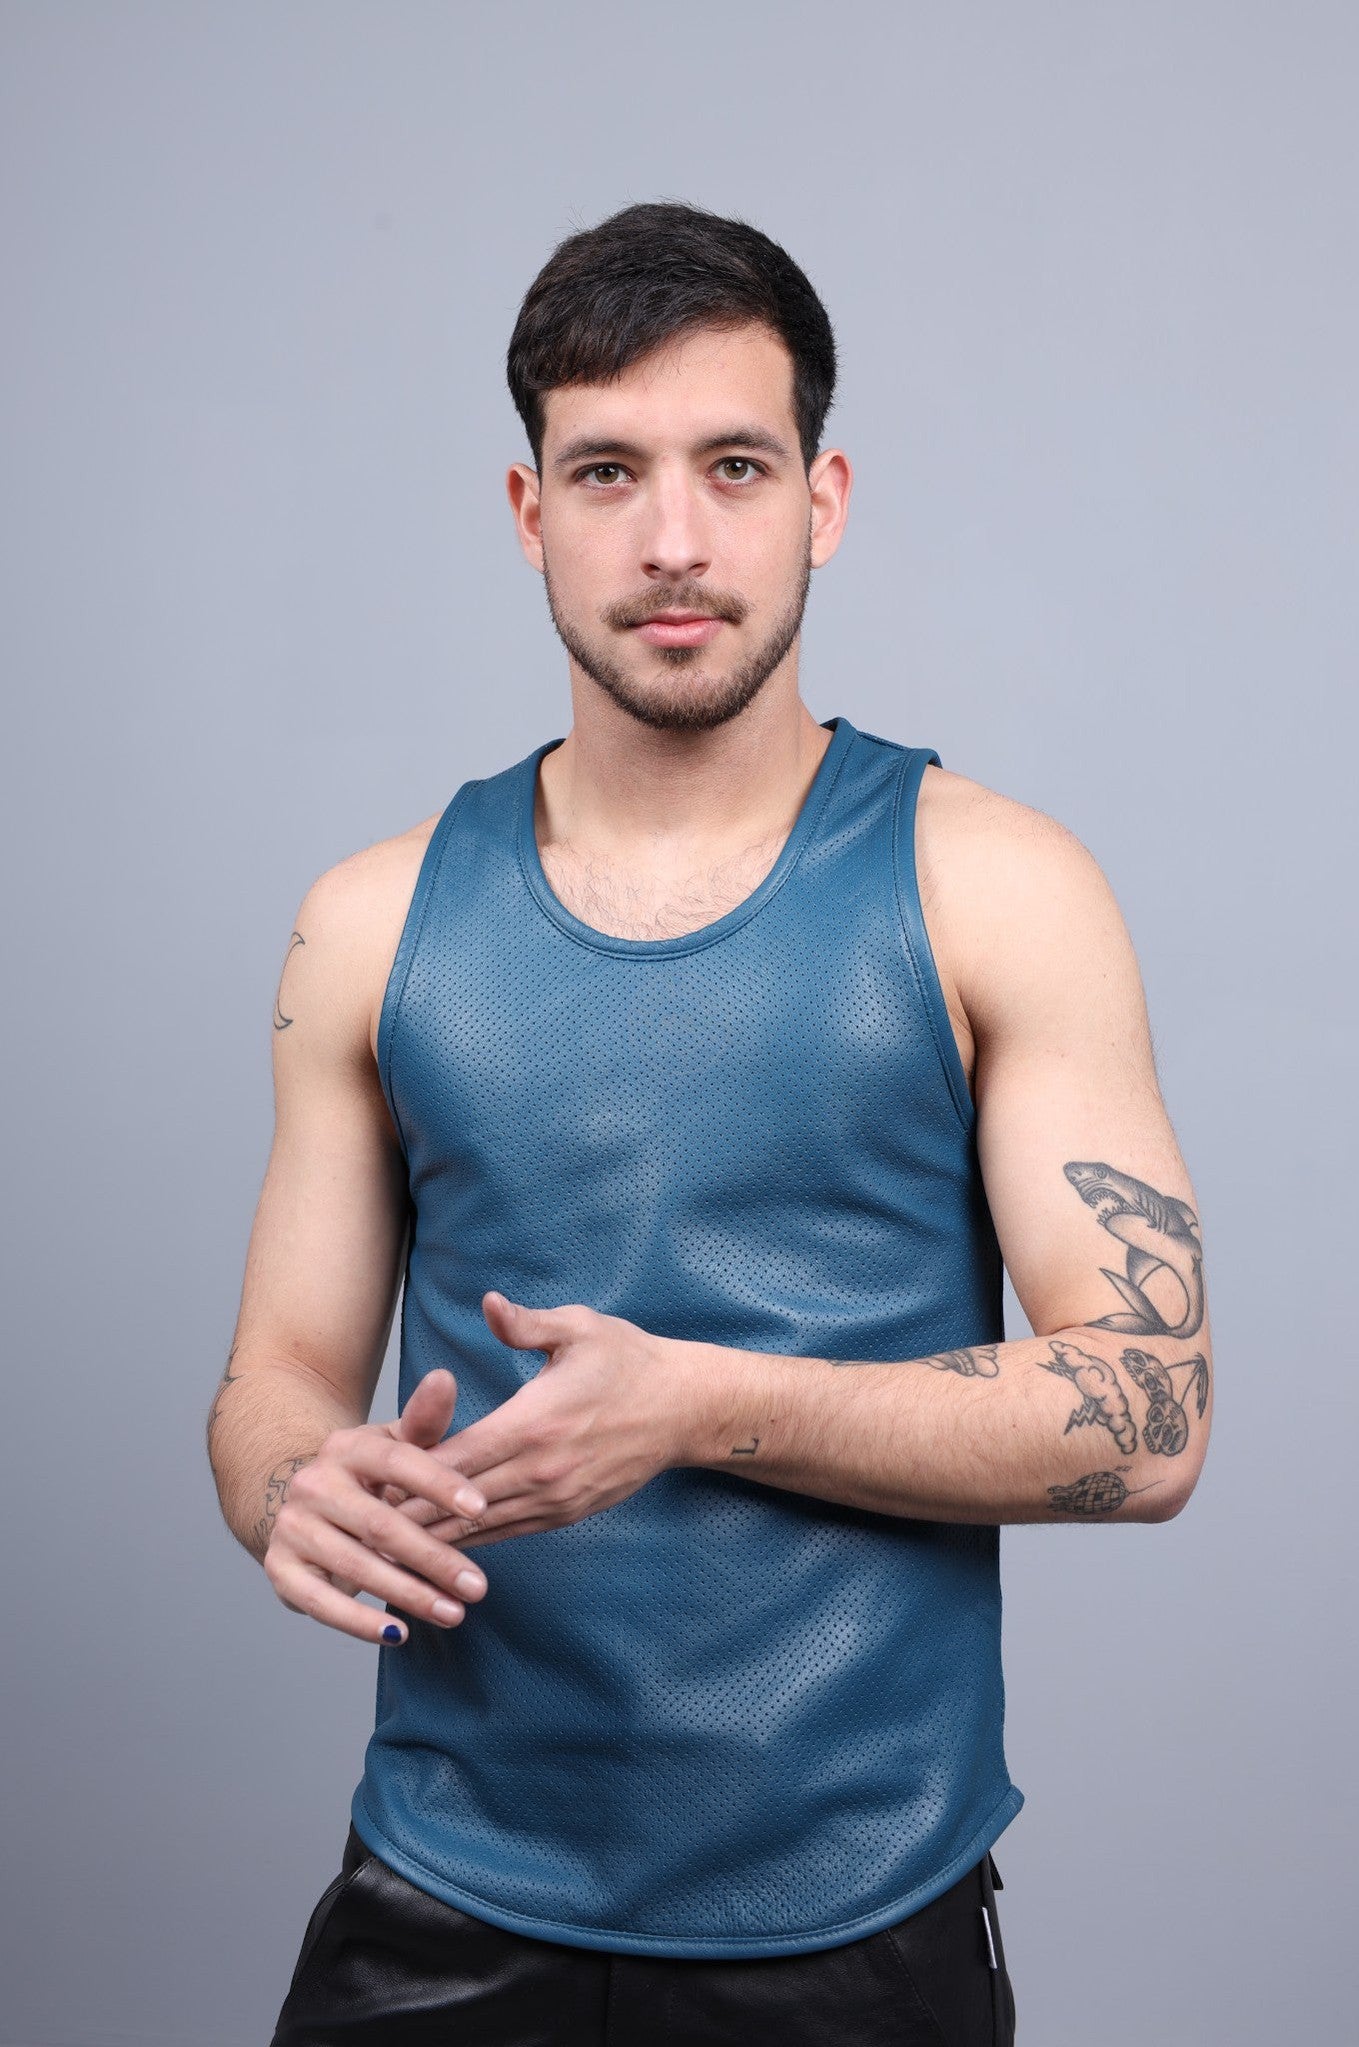 Jeans Blue Leather Perforated Tank Top at MR. Riegillio